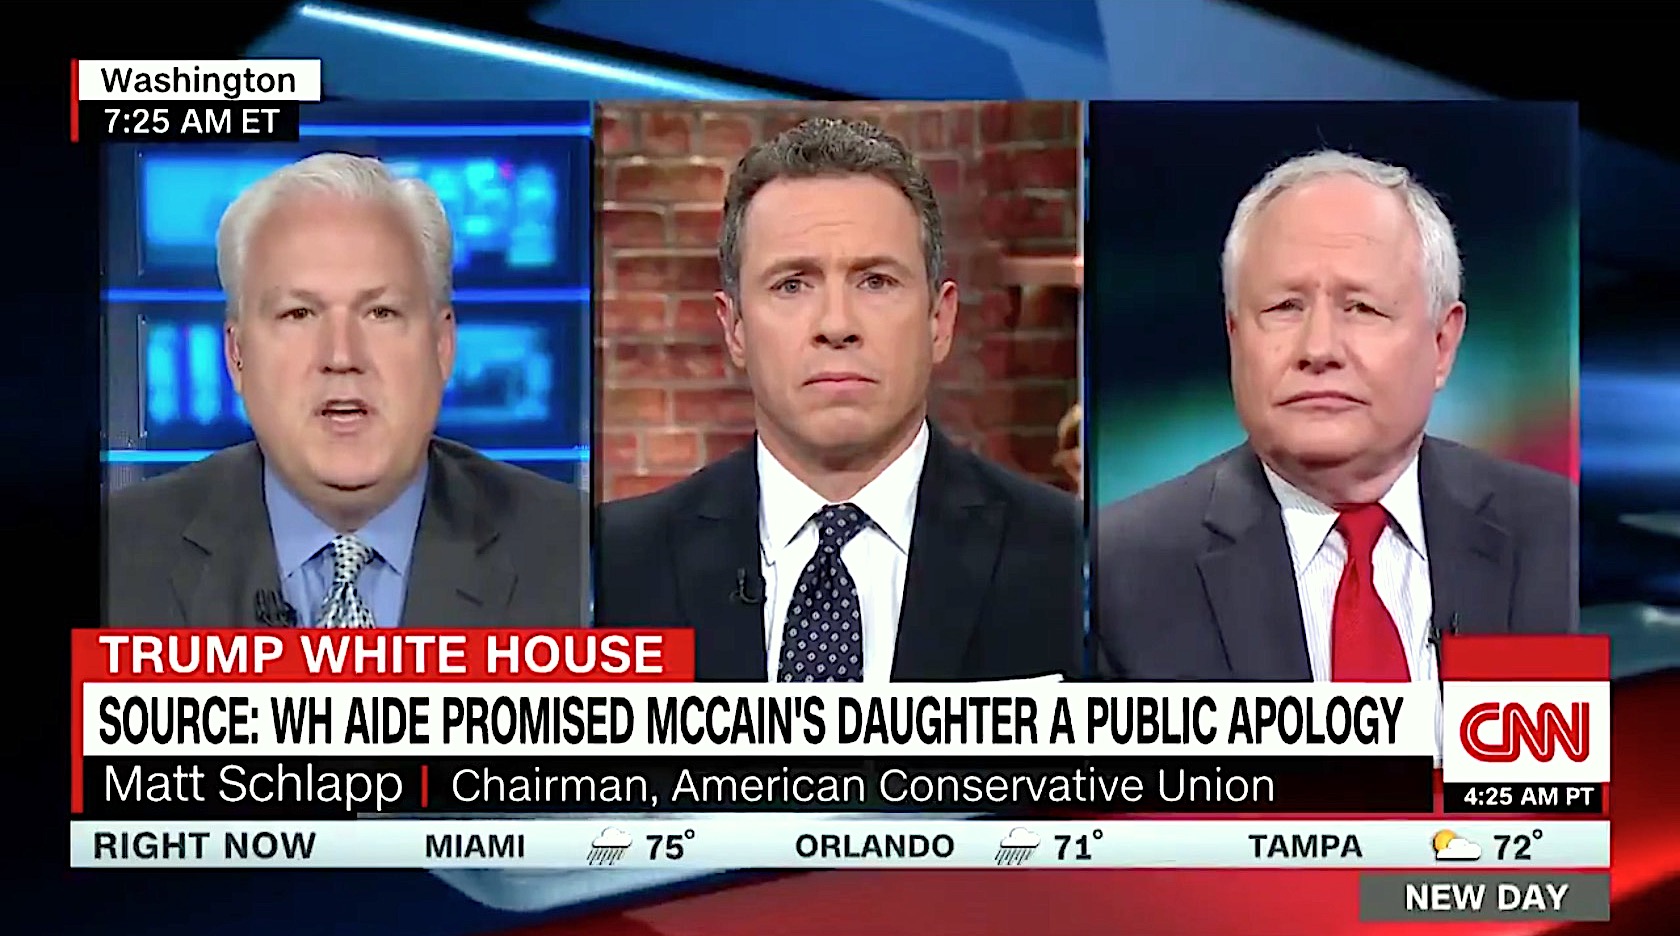 Chris Cuomo wants to know why the White House did not apologize to John McCain